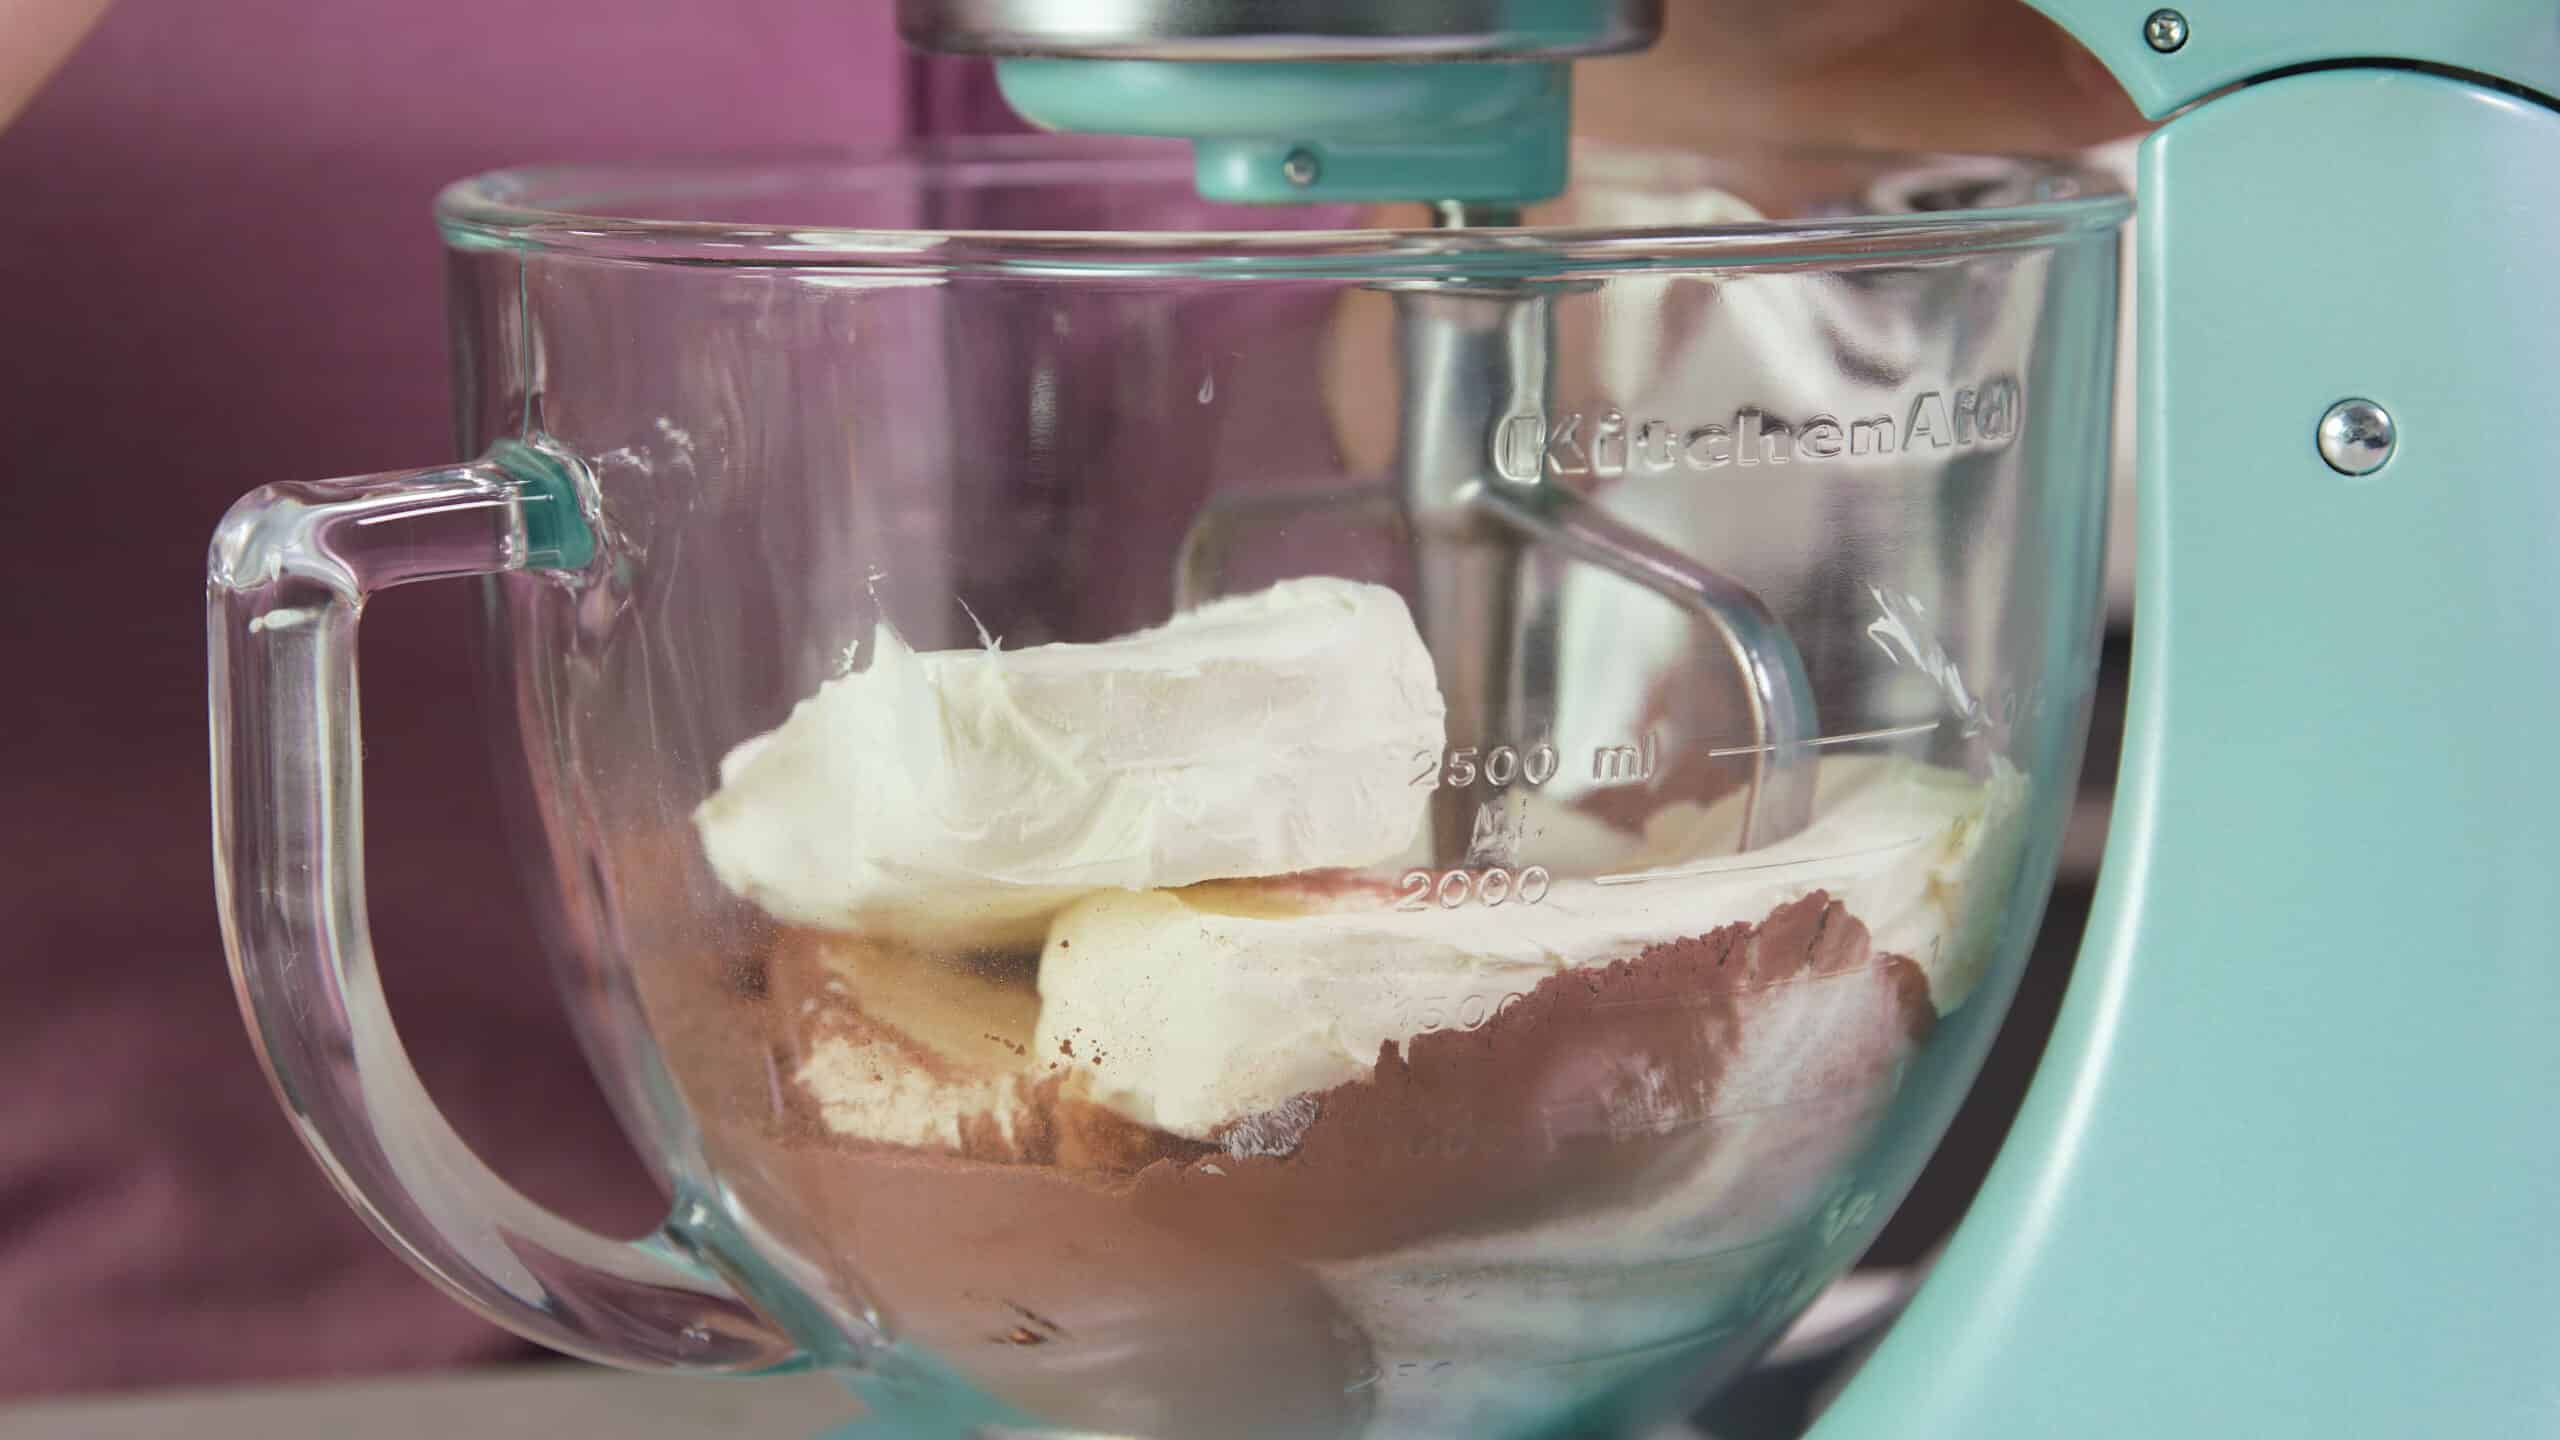 Side view of clear glass measuring bowl connected to a countertop mixer with a metal mixing paddle filled with cocoa powder, cream cheese and other batter ingredients.